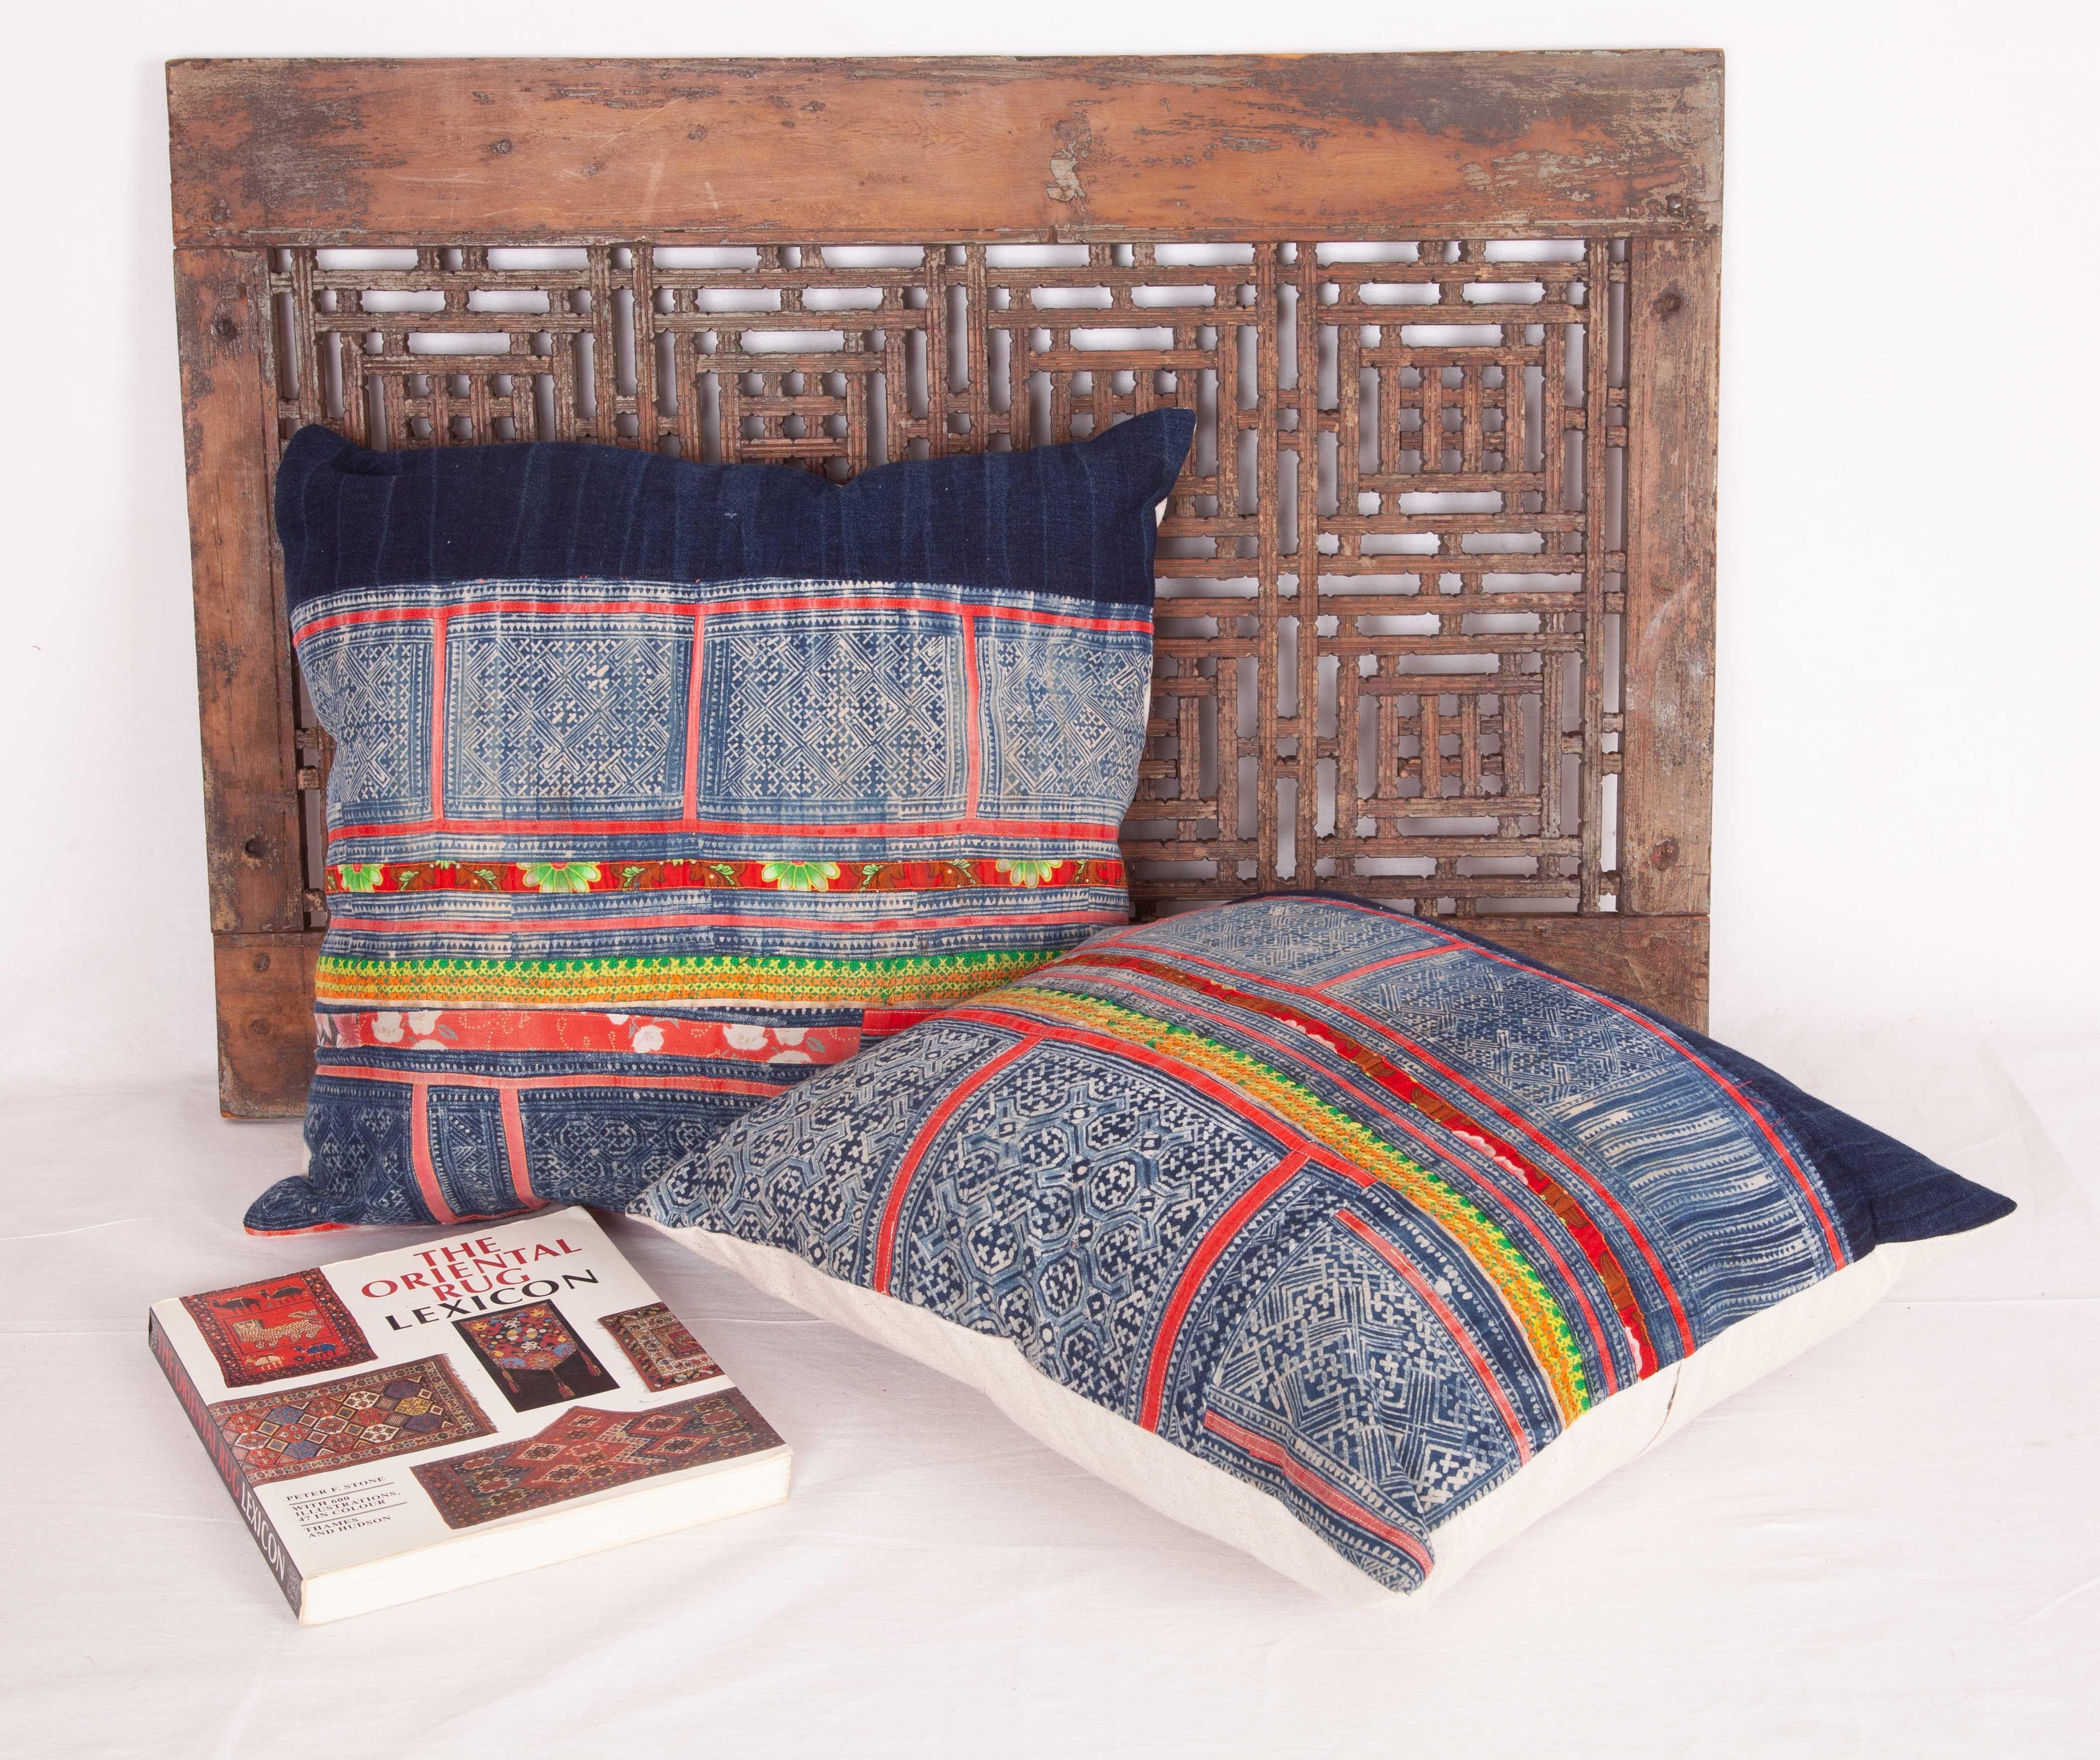 Cotton Vintage Pillow Cases / Cushions Made from a Hmong Hill Tribe Batik Textile